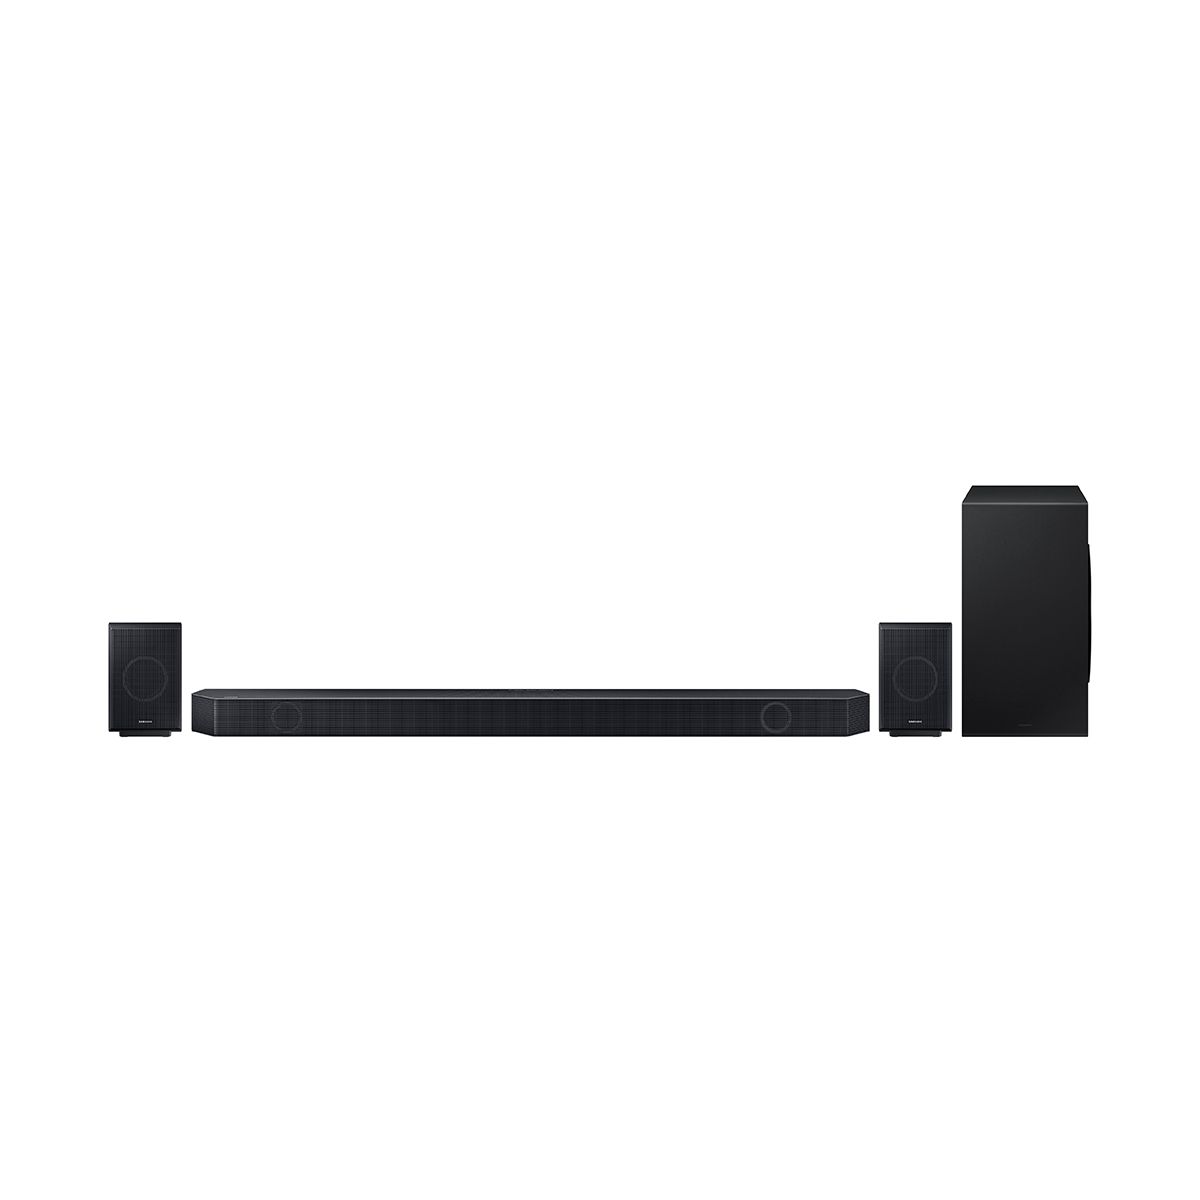 Samsung Q990C 11.1.4 ch. Wireless Dolby ATMOS Soundbar w/ Wireless Subwoofer and Surrounds - front view rearranged